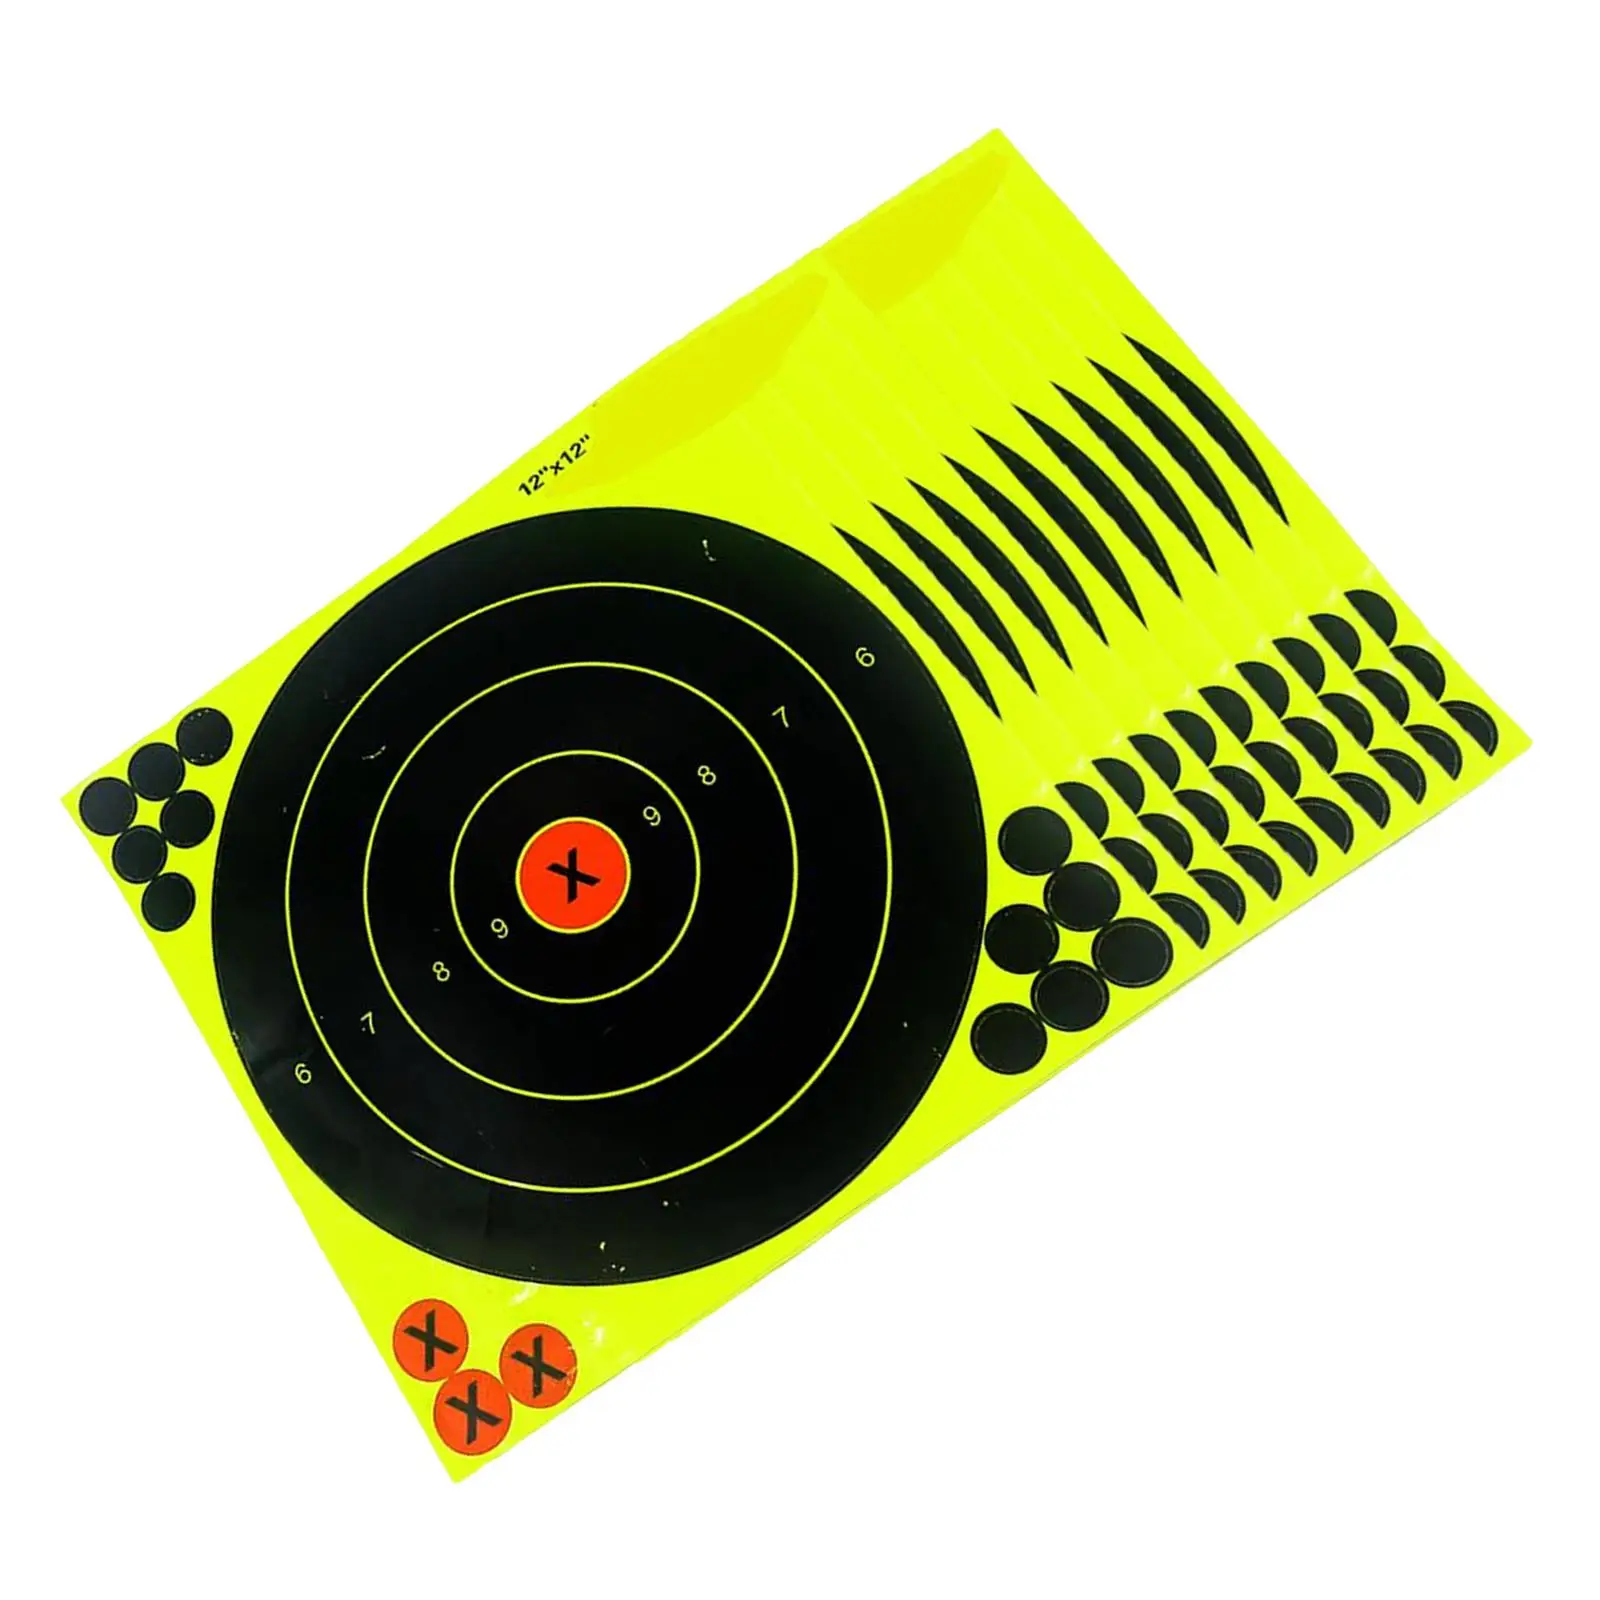 10Pcs 12inch Shooting Targets Splatter Reactive Paper Sticker Self Adhesive High Visibility Paper Target for Garden Practice Bow